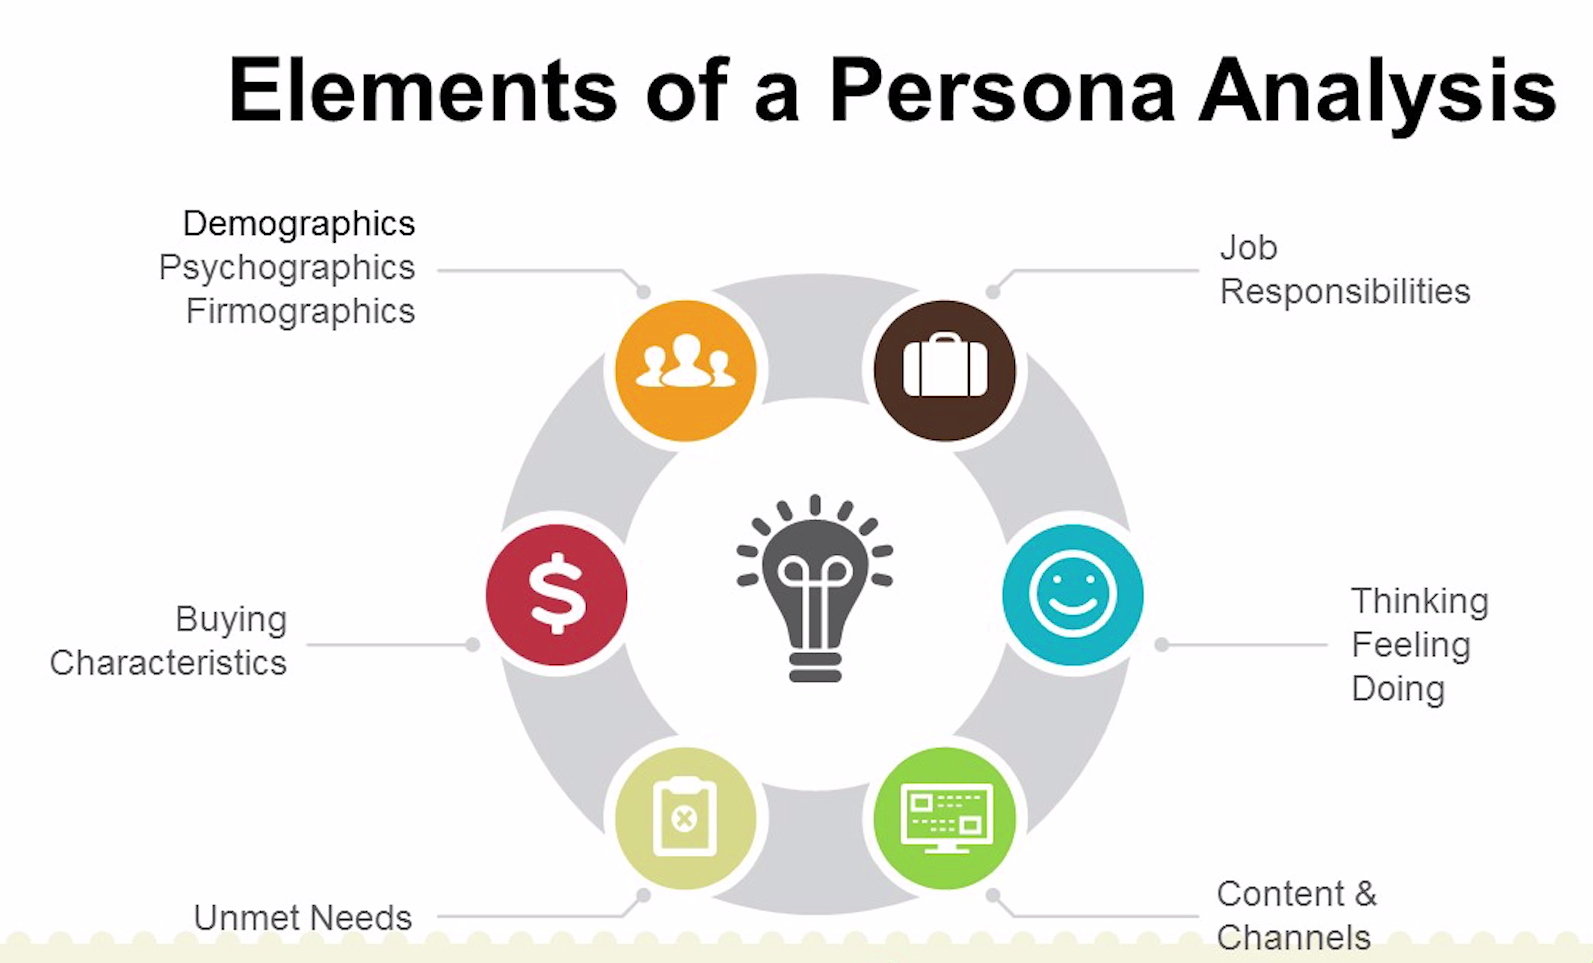 Getting the core elements of a persona analysis leads to effective B2B storytelling.